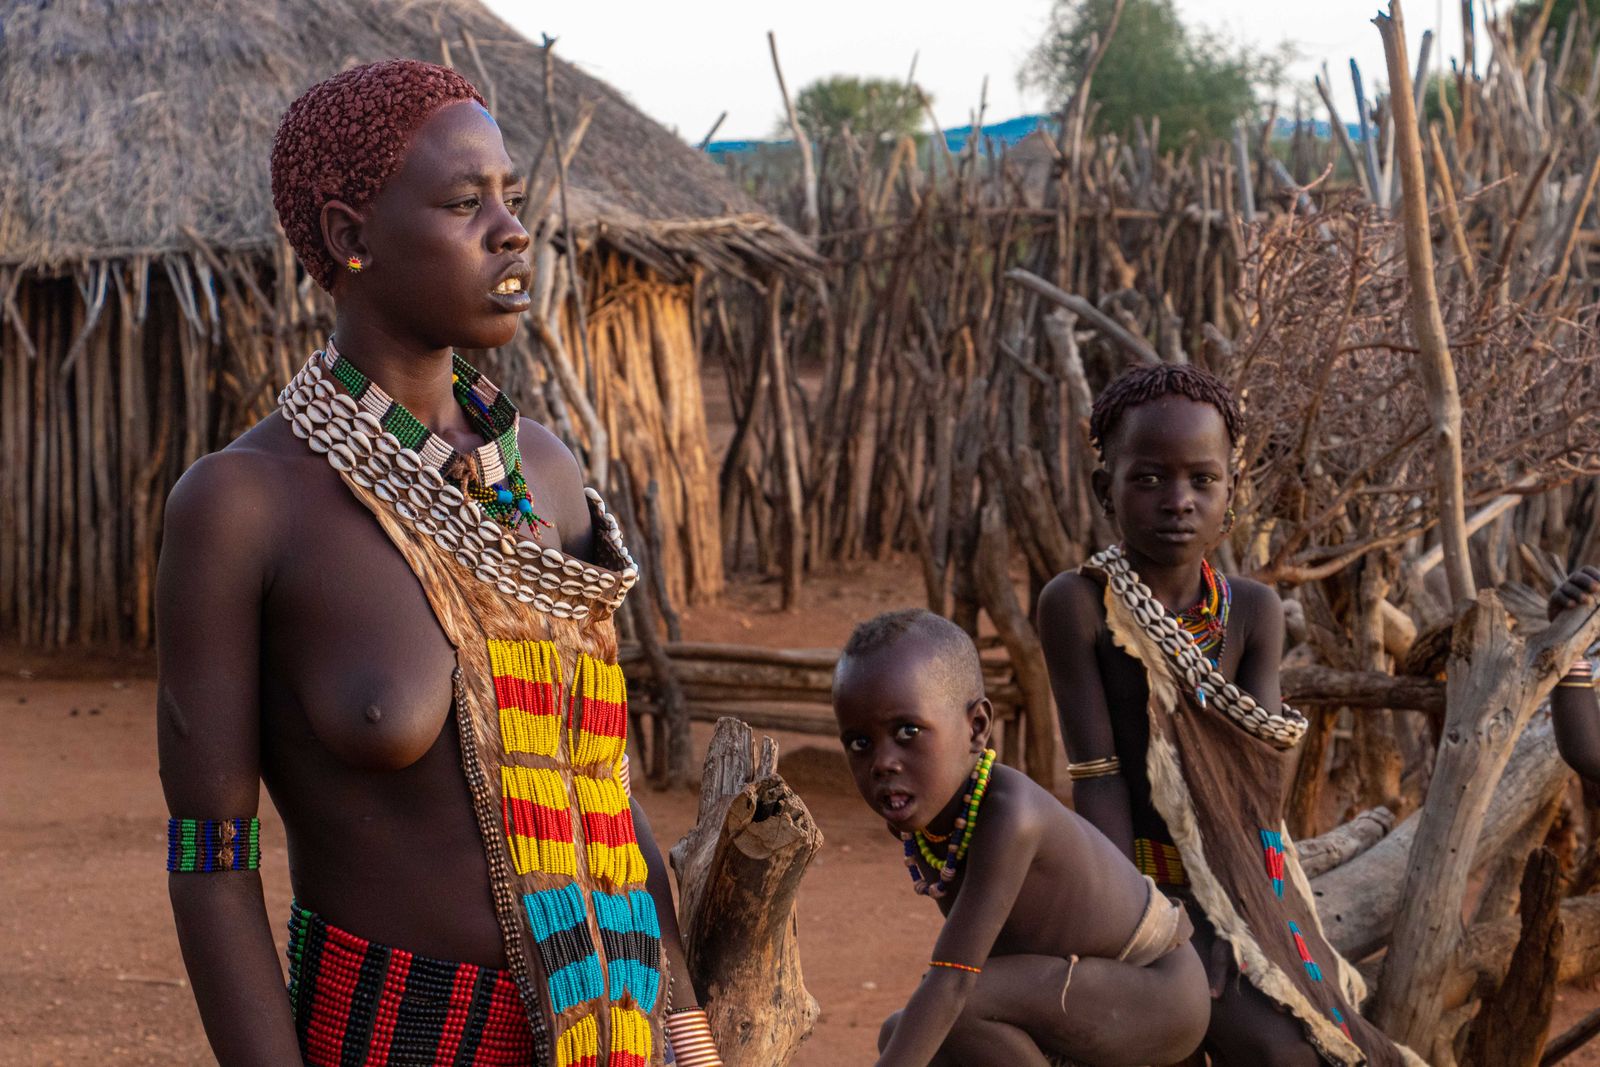 © Nwando Ebeledike - A mother and her children in the Hamar tribe, Omo Valley, Ethiopia